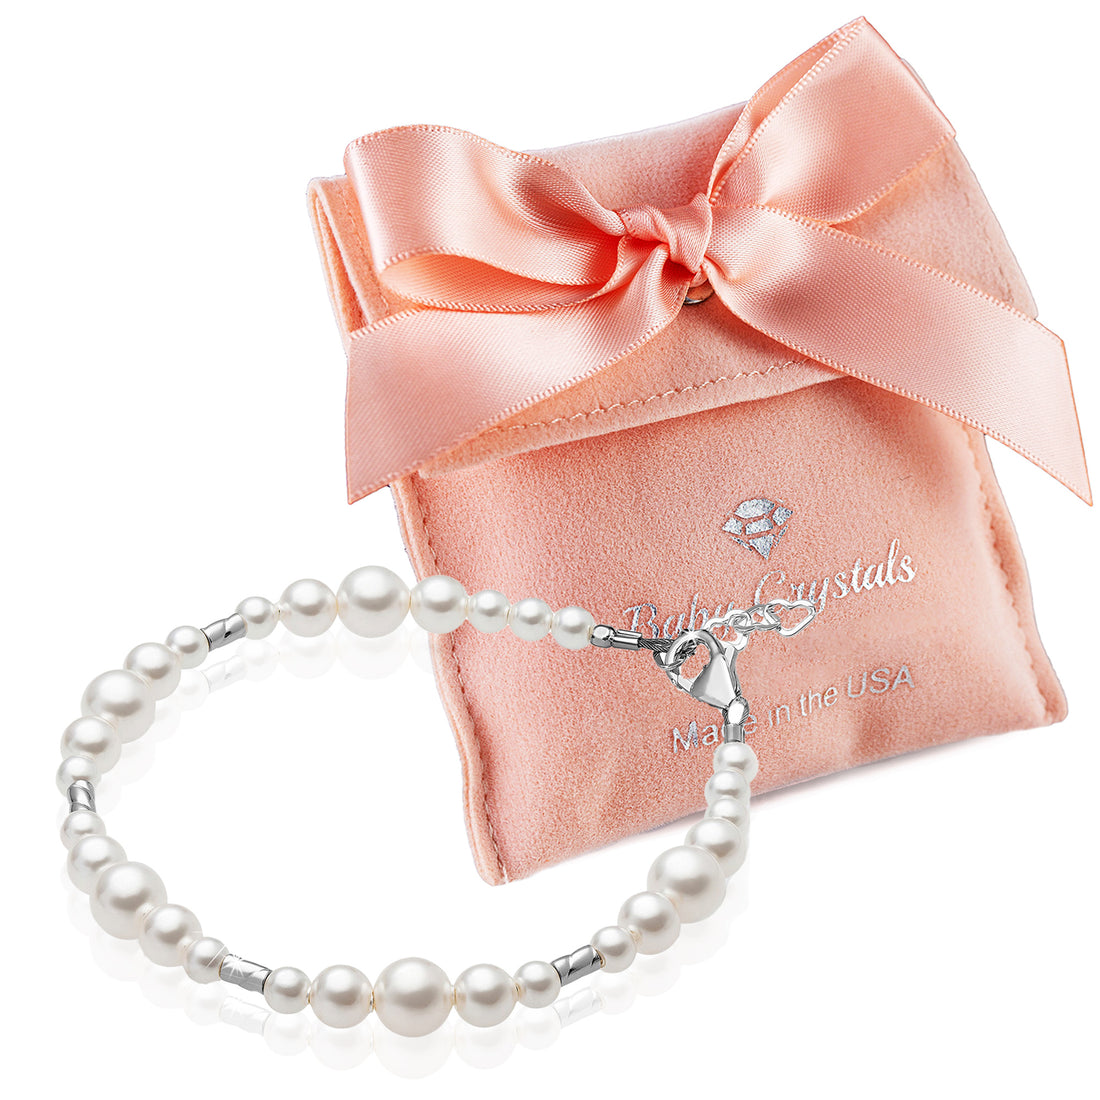 Teen Girl Bracelets with White Pearl & Silver Crimps